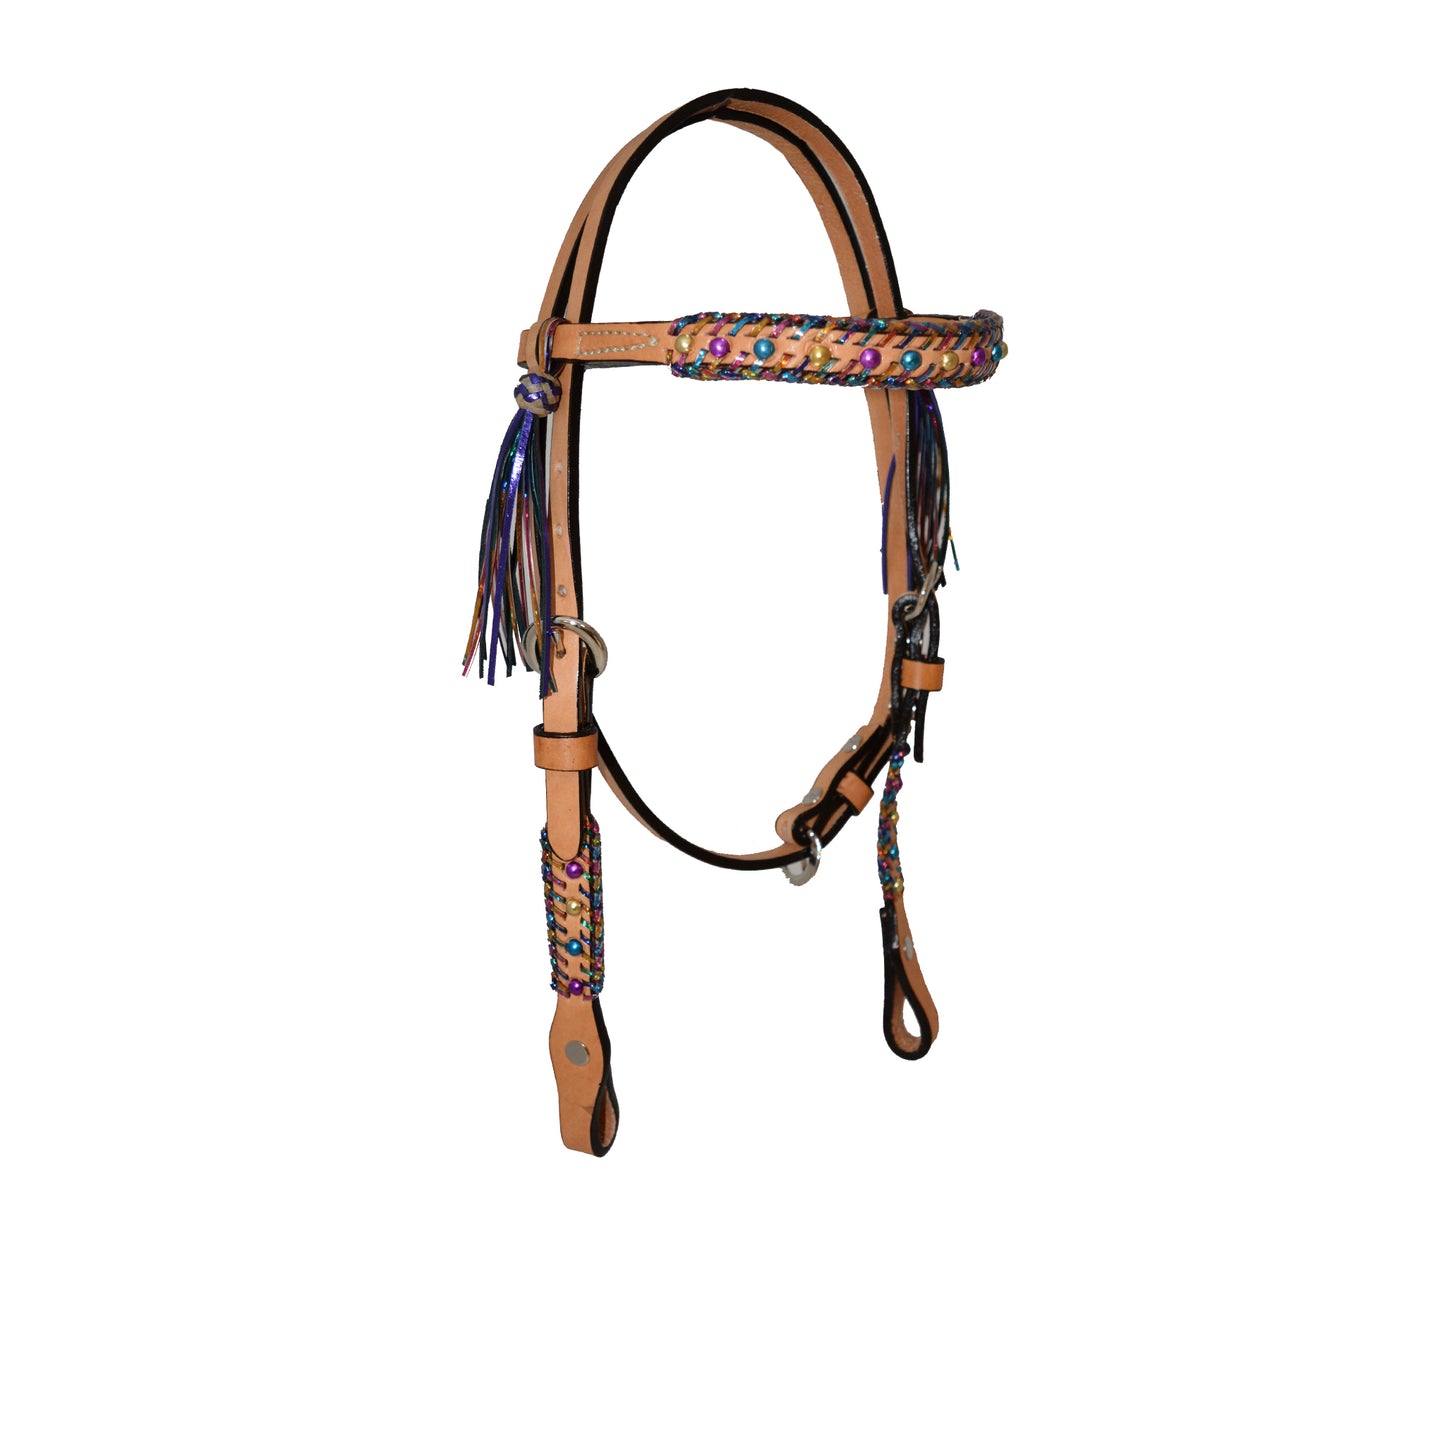 2715-TD 1/2" Pony straight browband headstall golden leather with fiesta Spanish lace, spots, and tassels